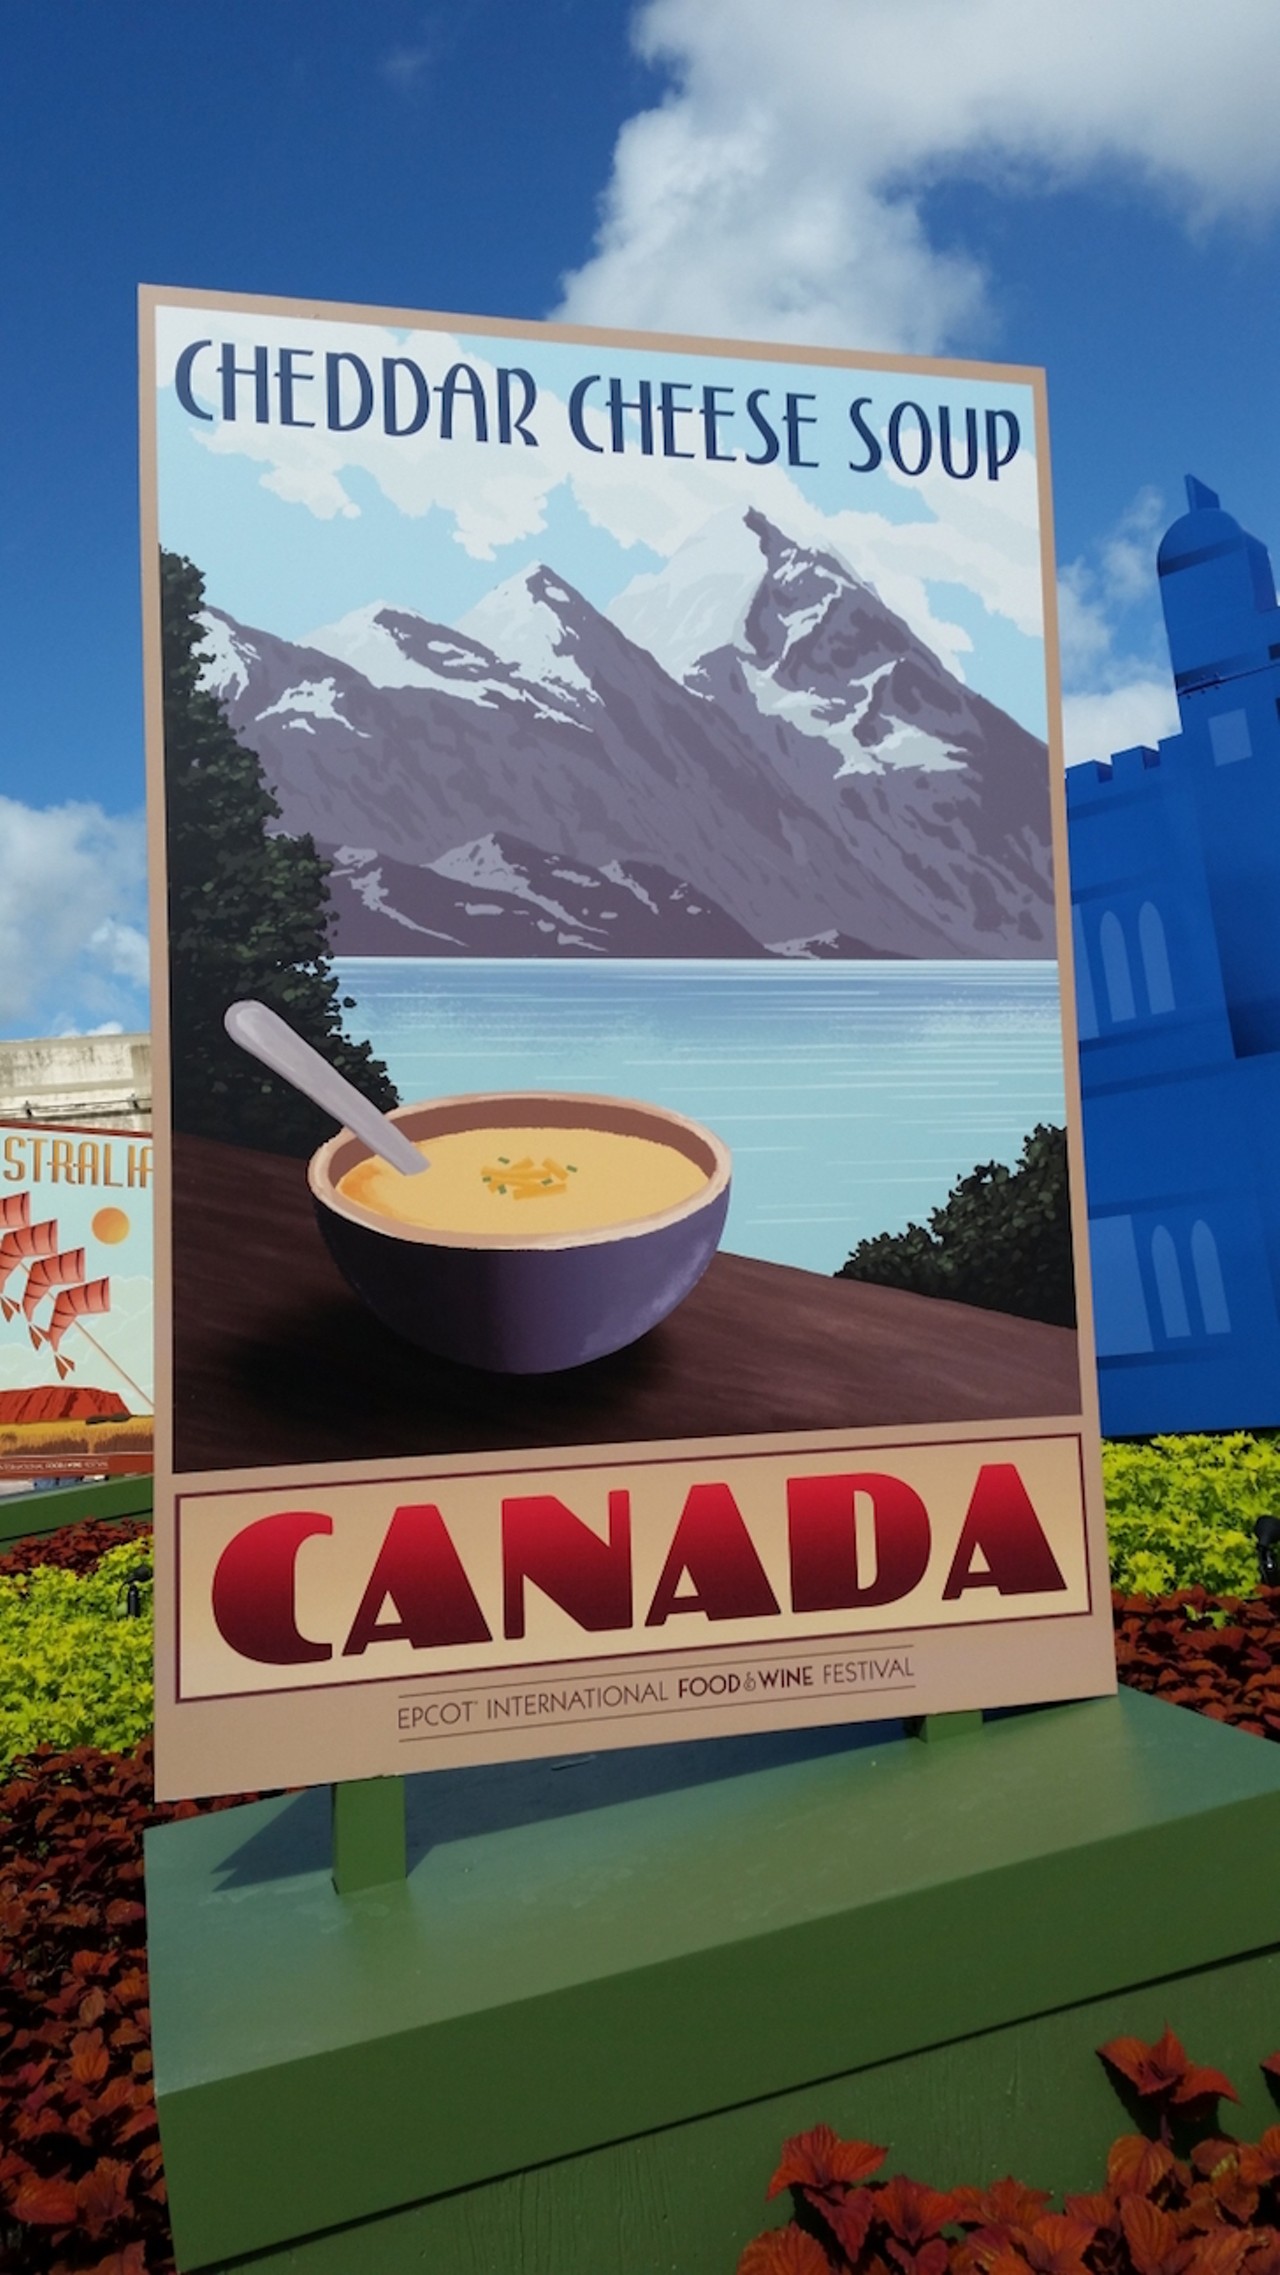 Nothing typifies the cuisine of Canada more than cheddar cheese soup (Canada)